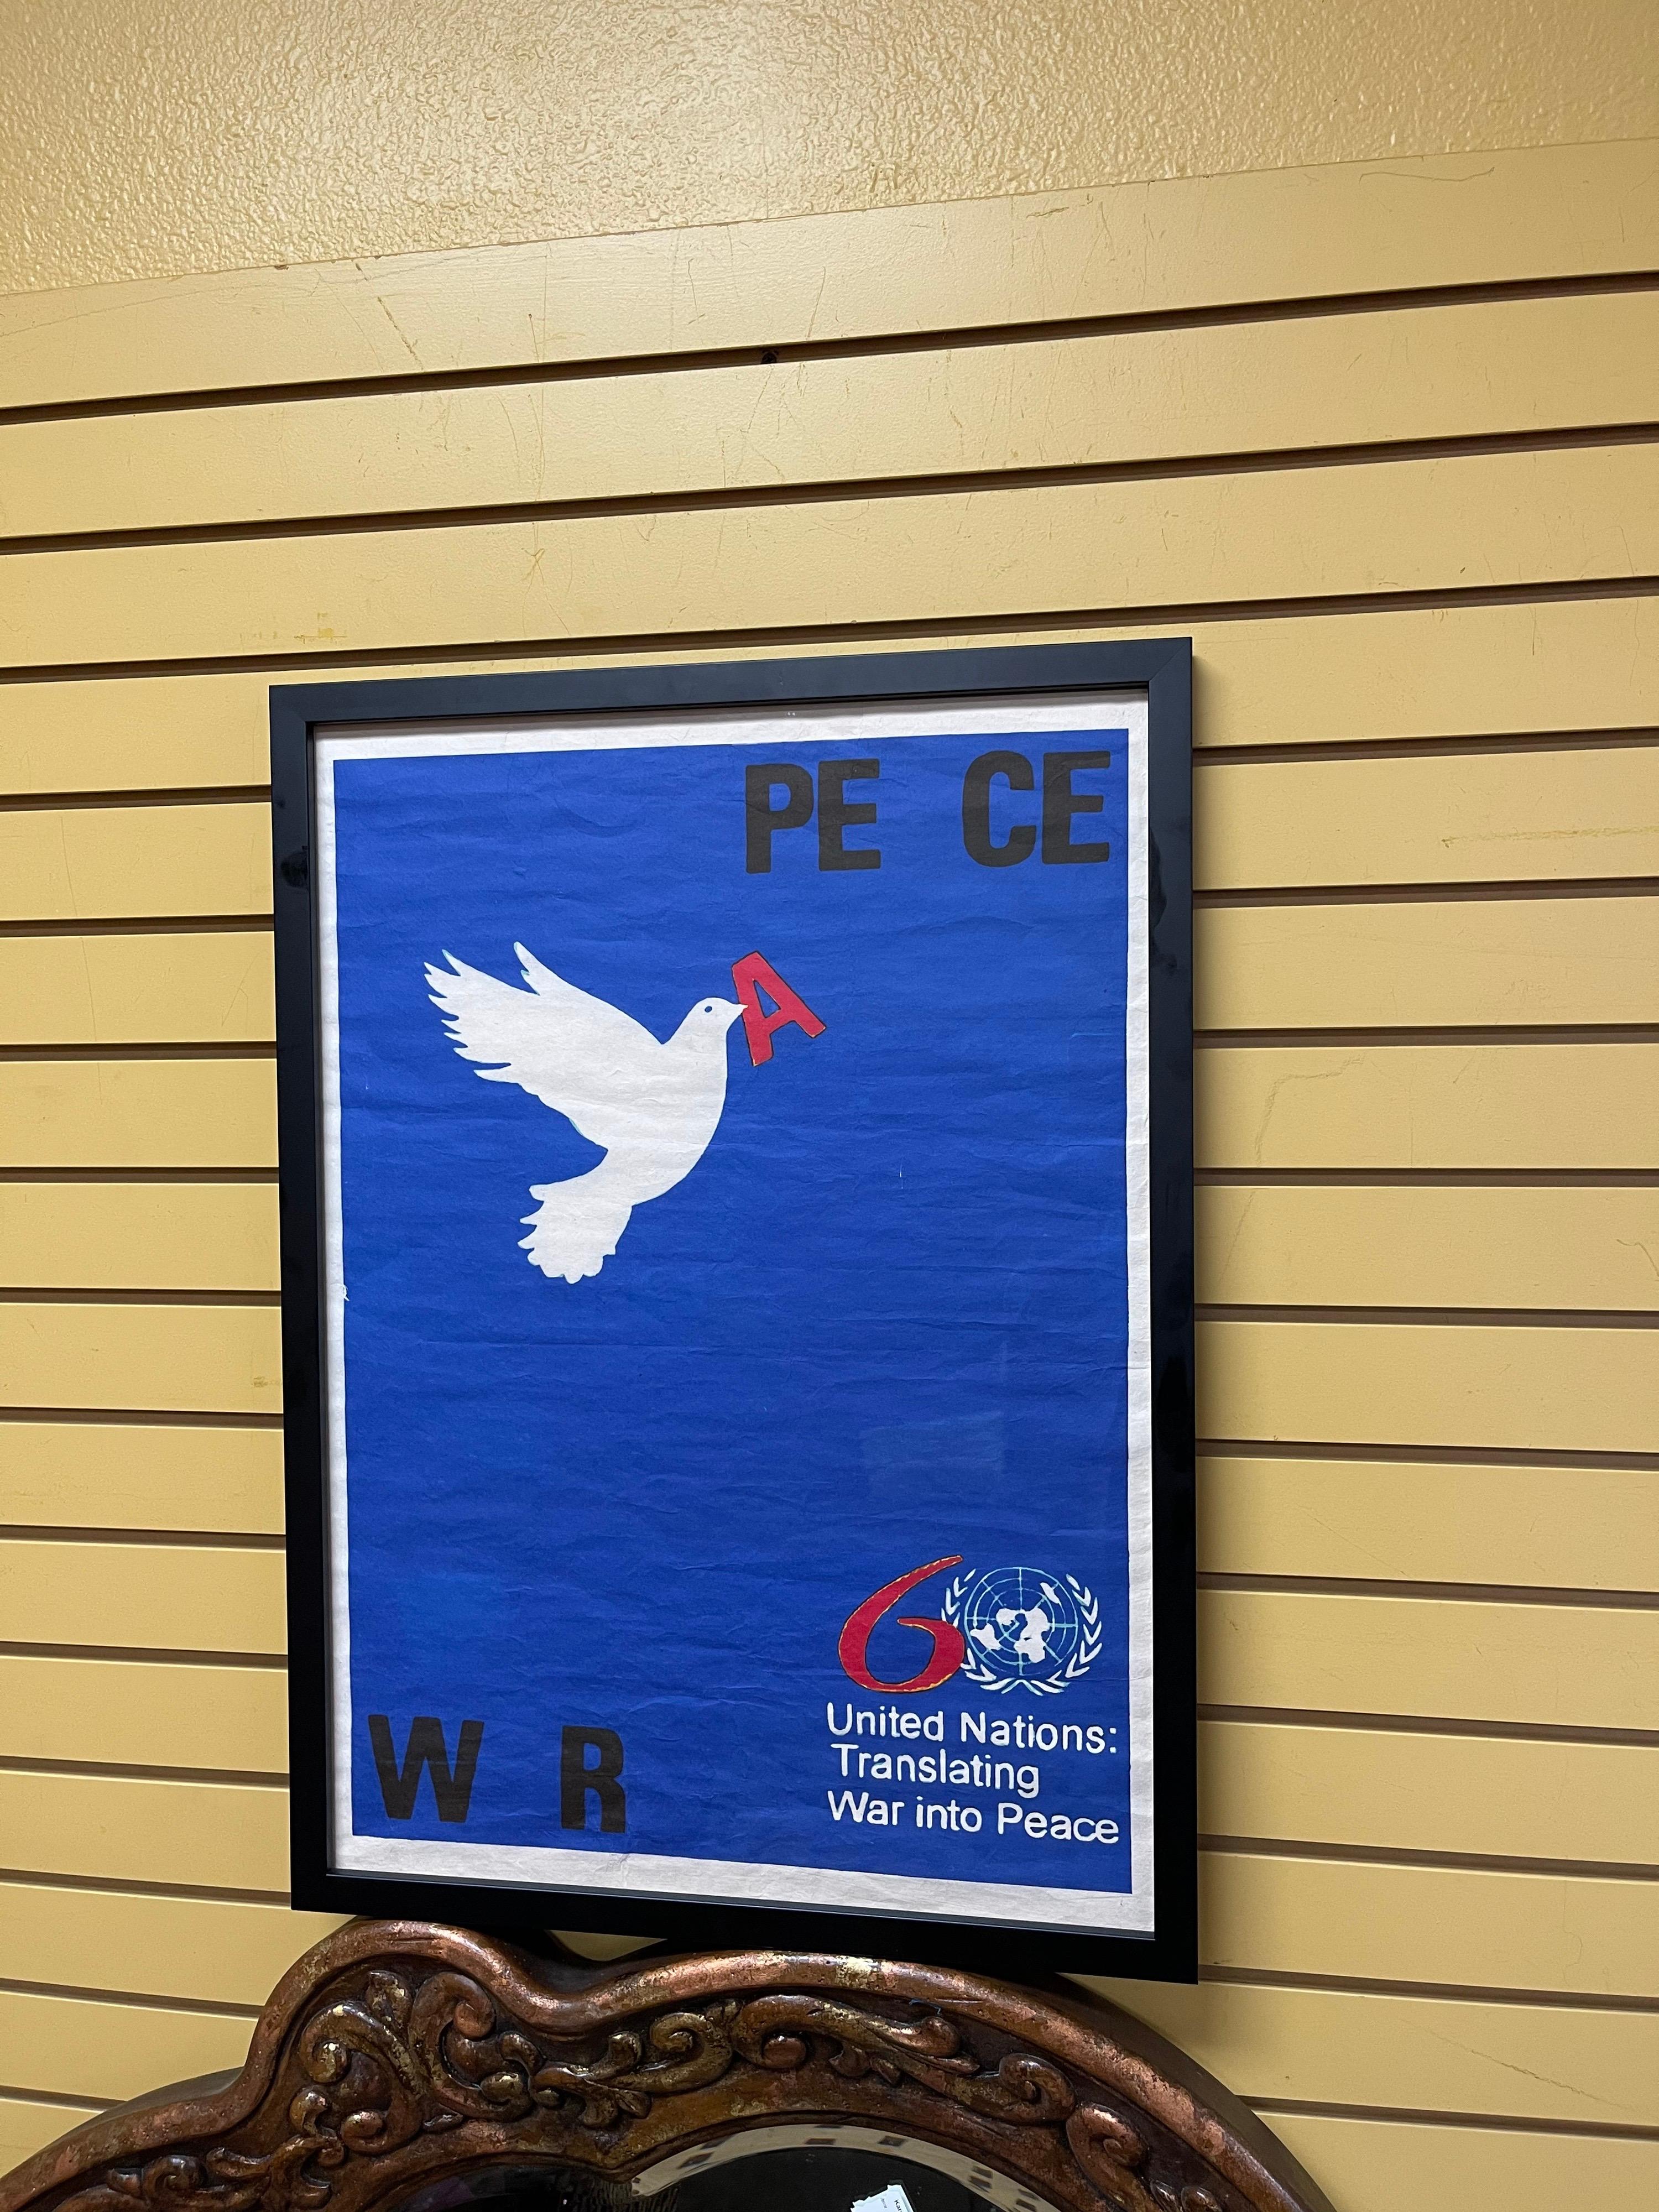 united nations translate war into peace